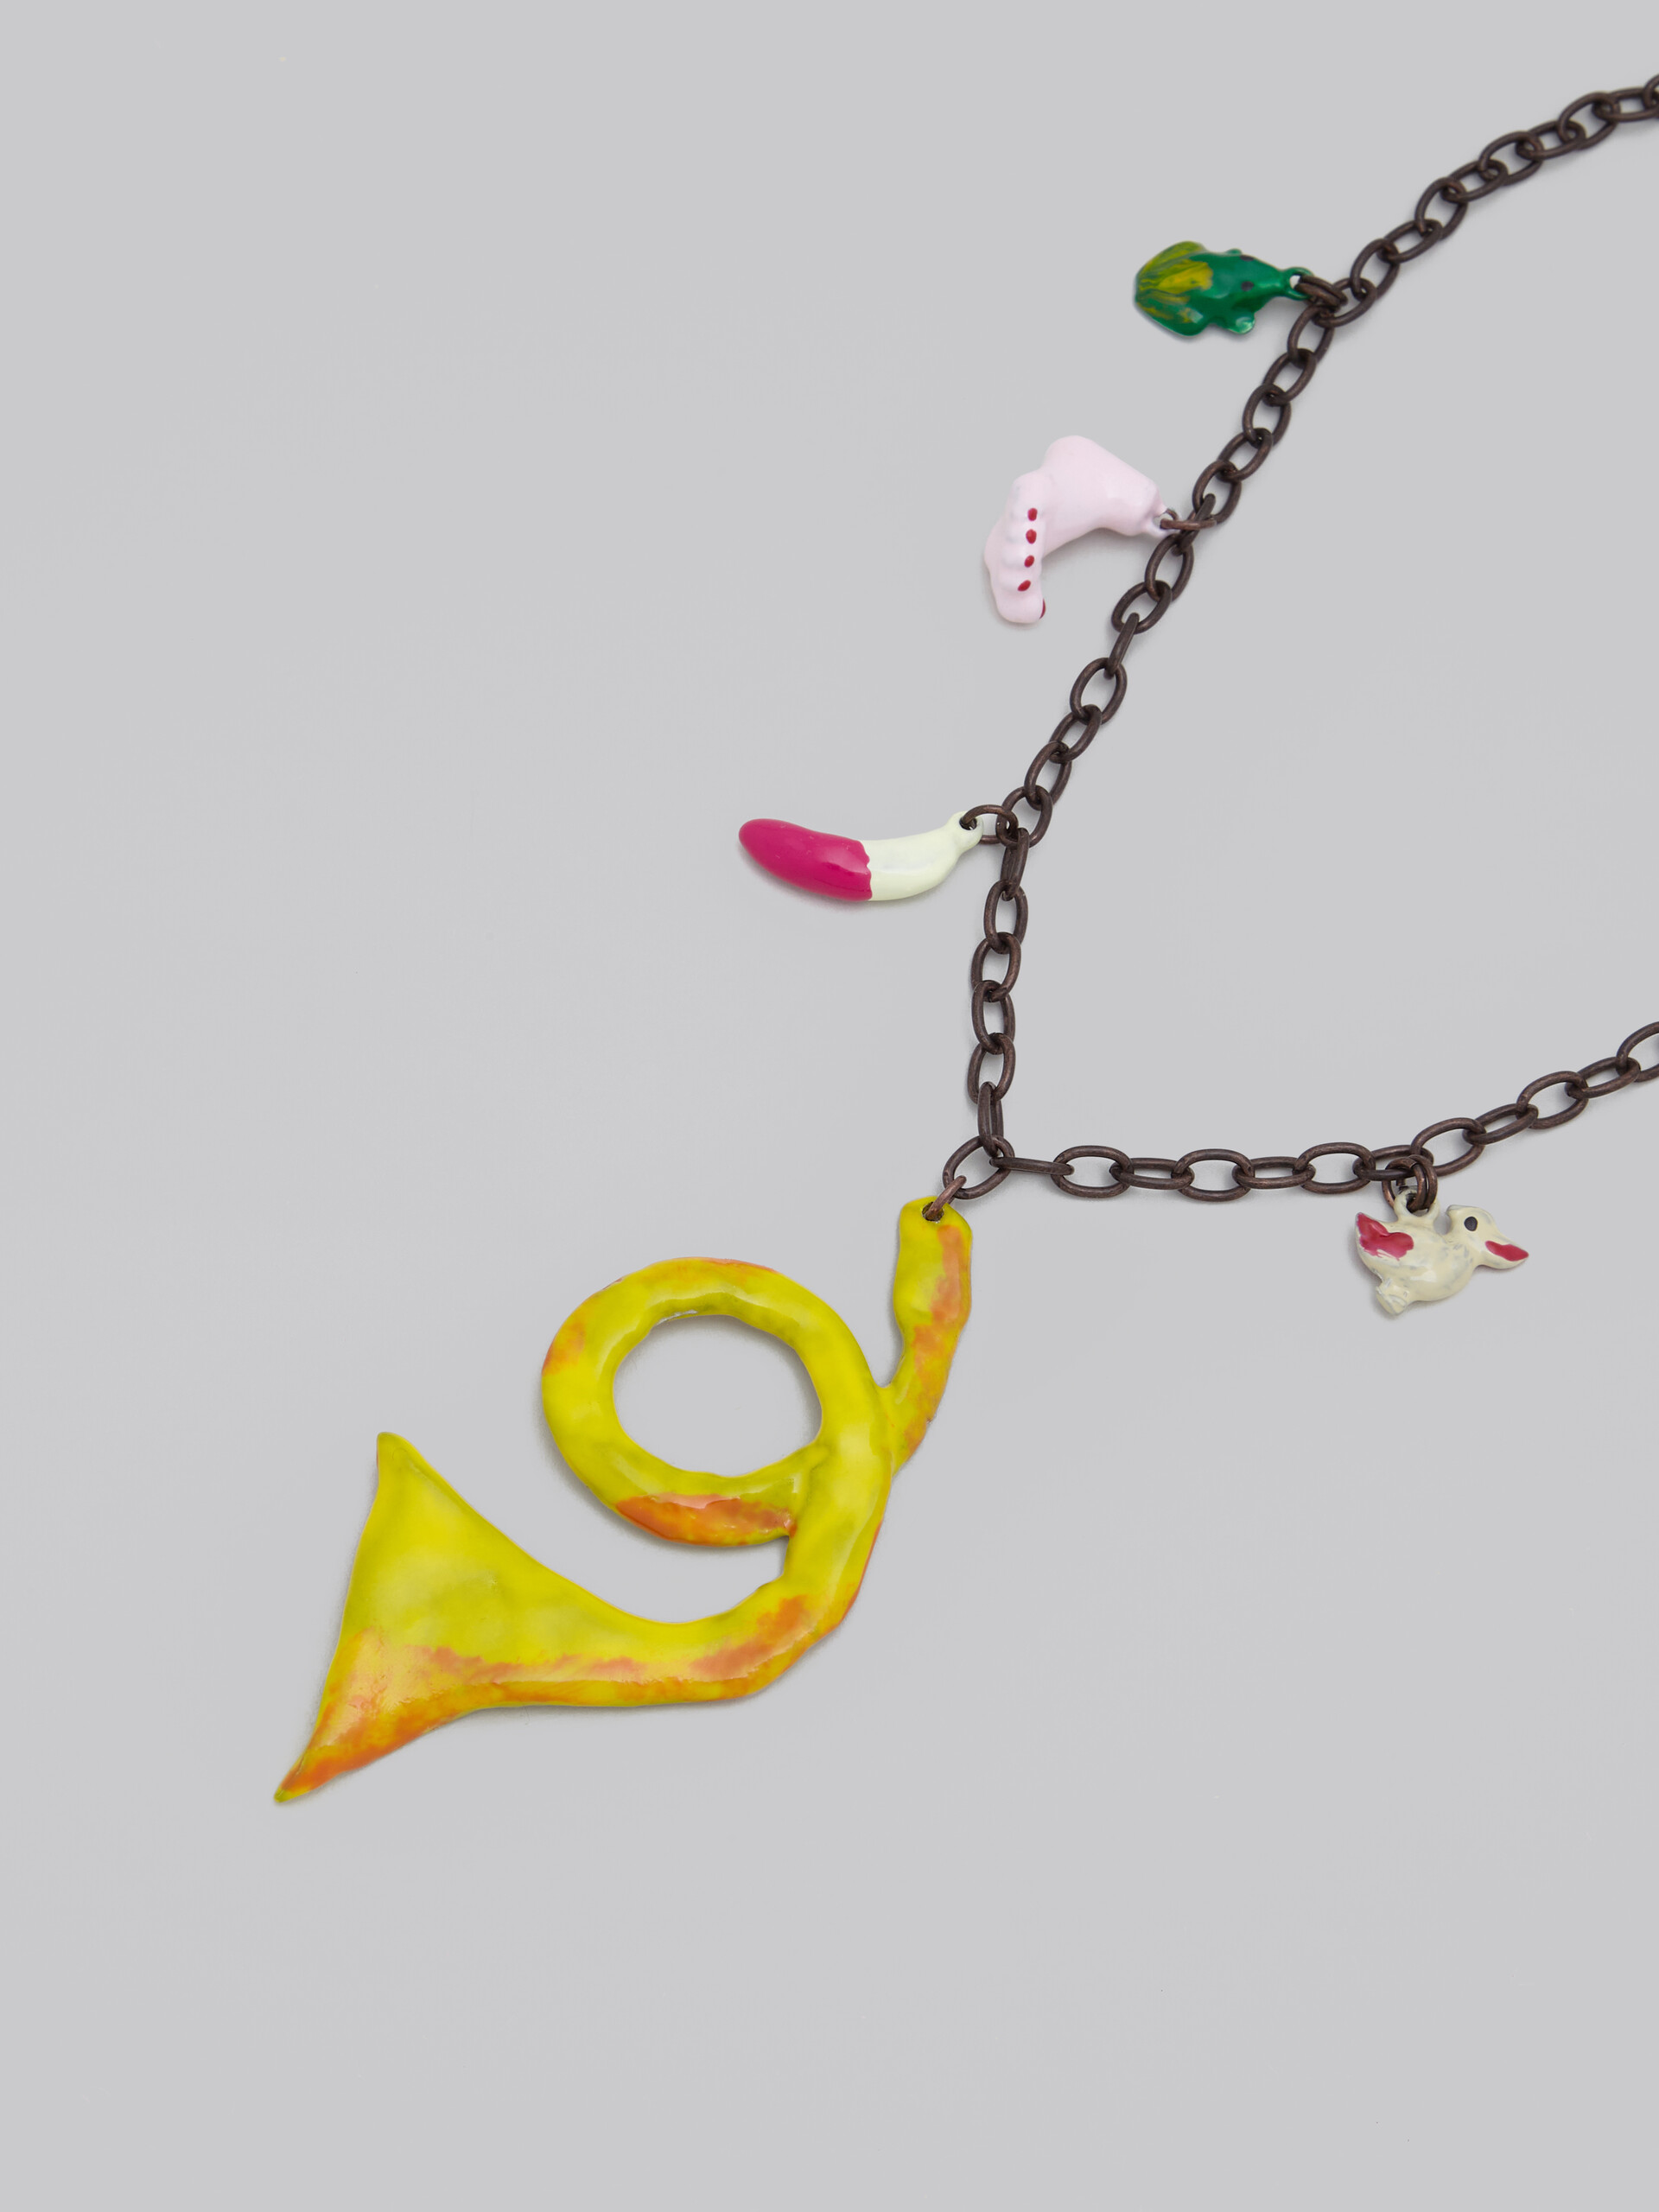 Marni x No Vacancy Inn - Necklace with green pink and yellow pendants - Necklaces - Image 4